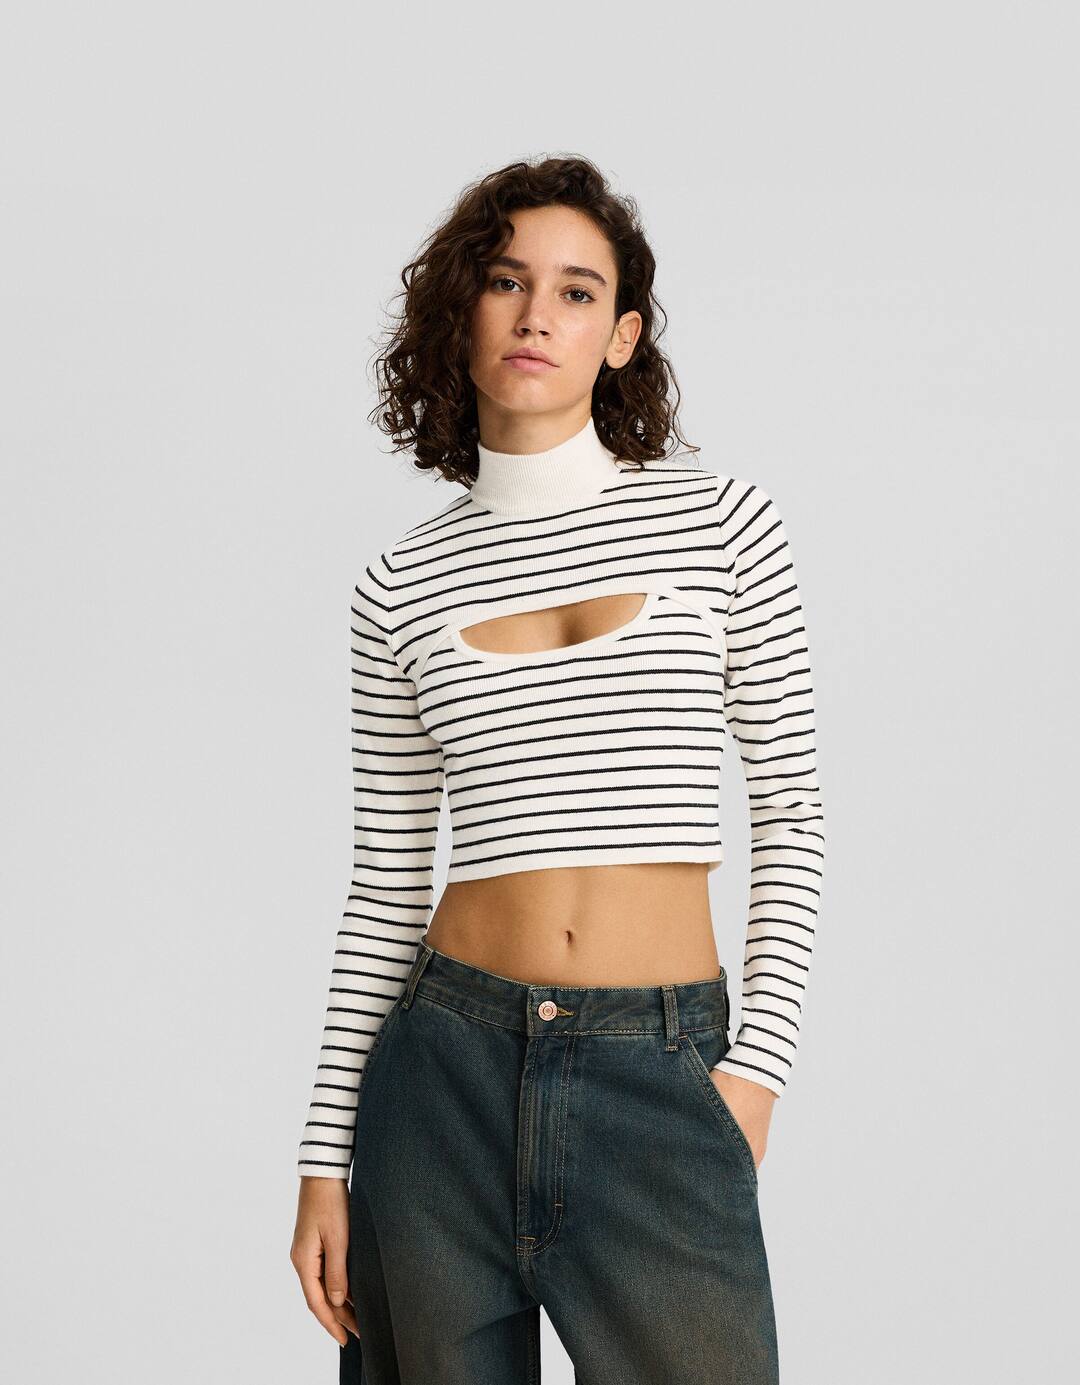 Striped cropped arm warmer sweater with a high neck